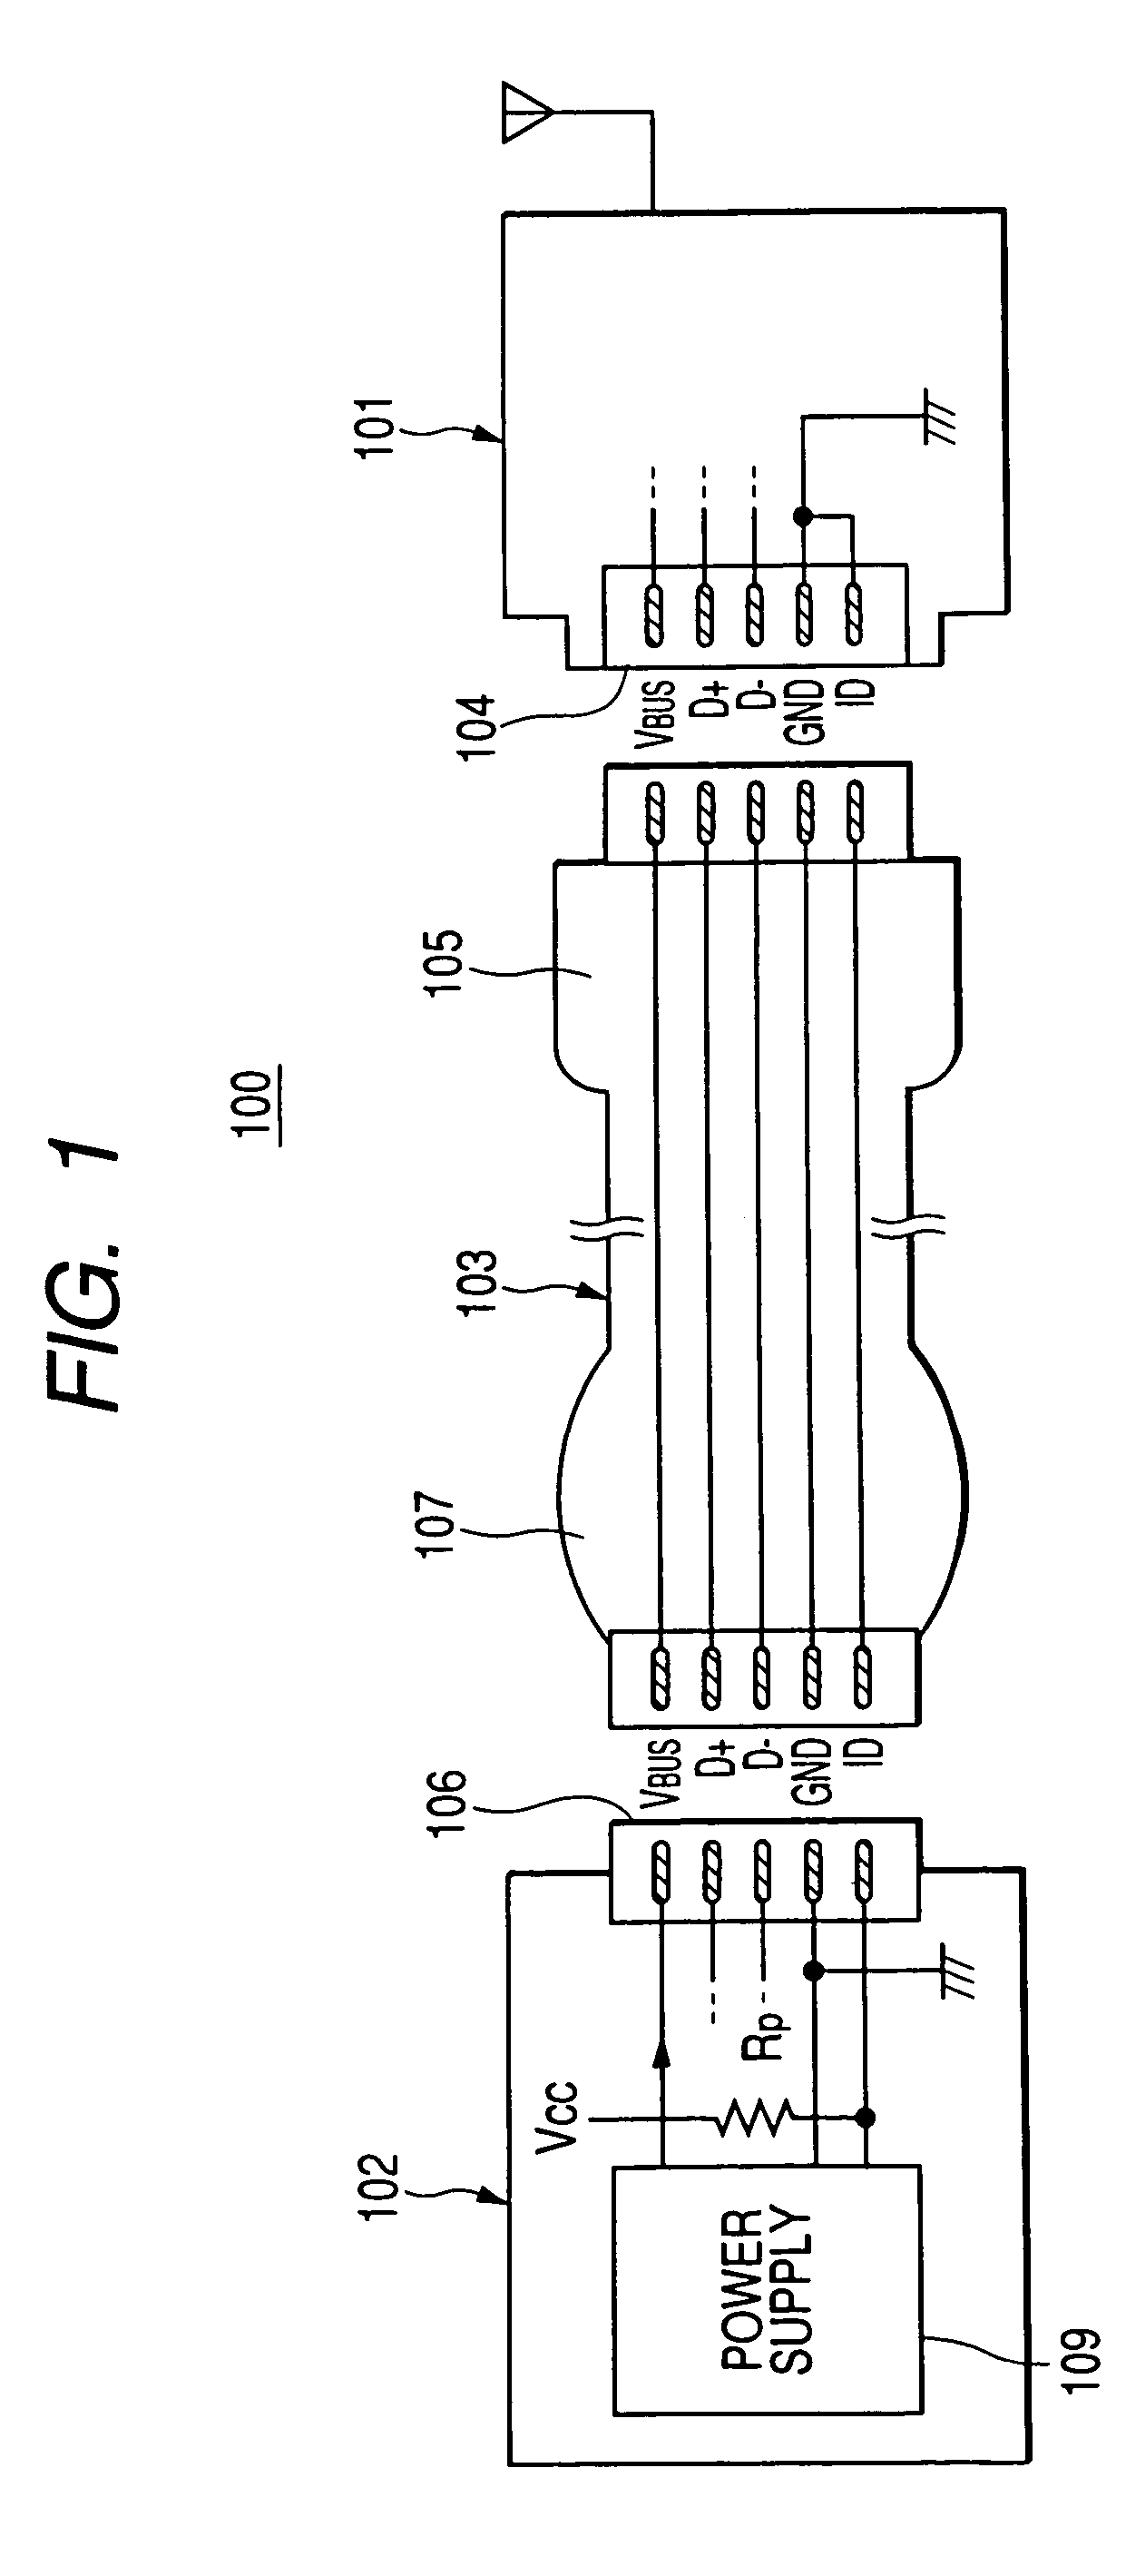 Device that provides power to a host via a Mini-B interface upon detection of a predetermined voltage